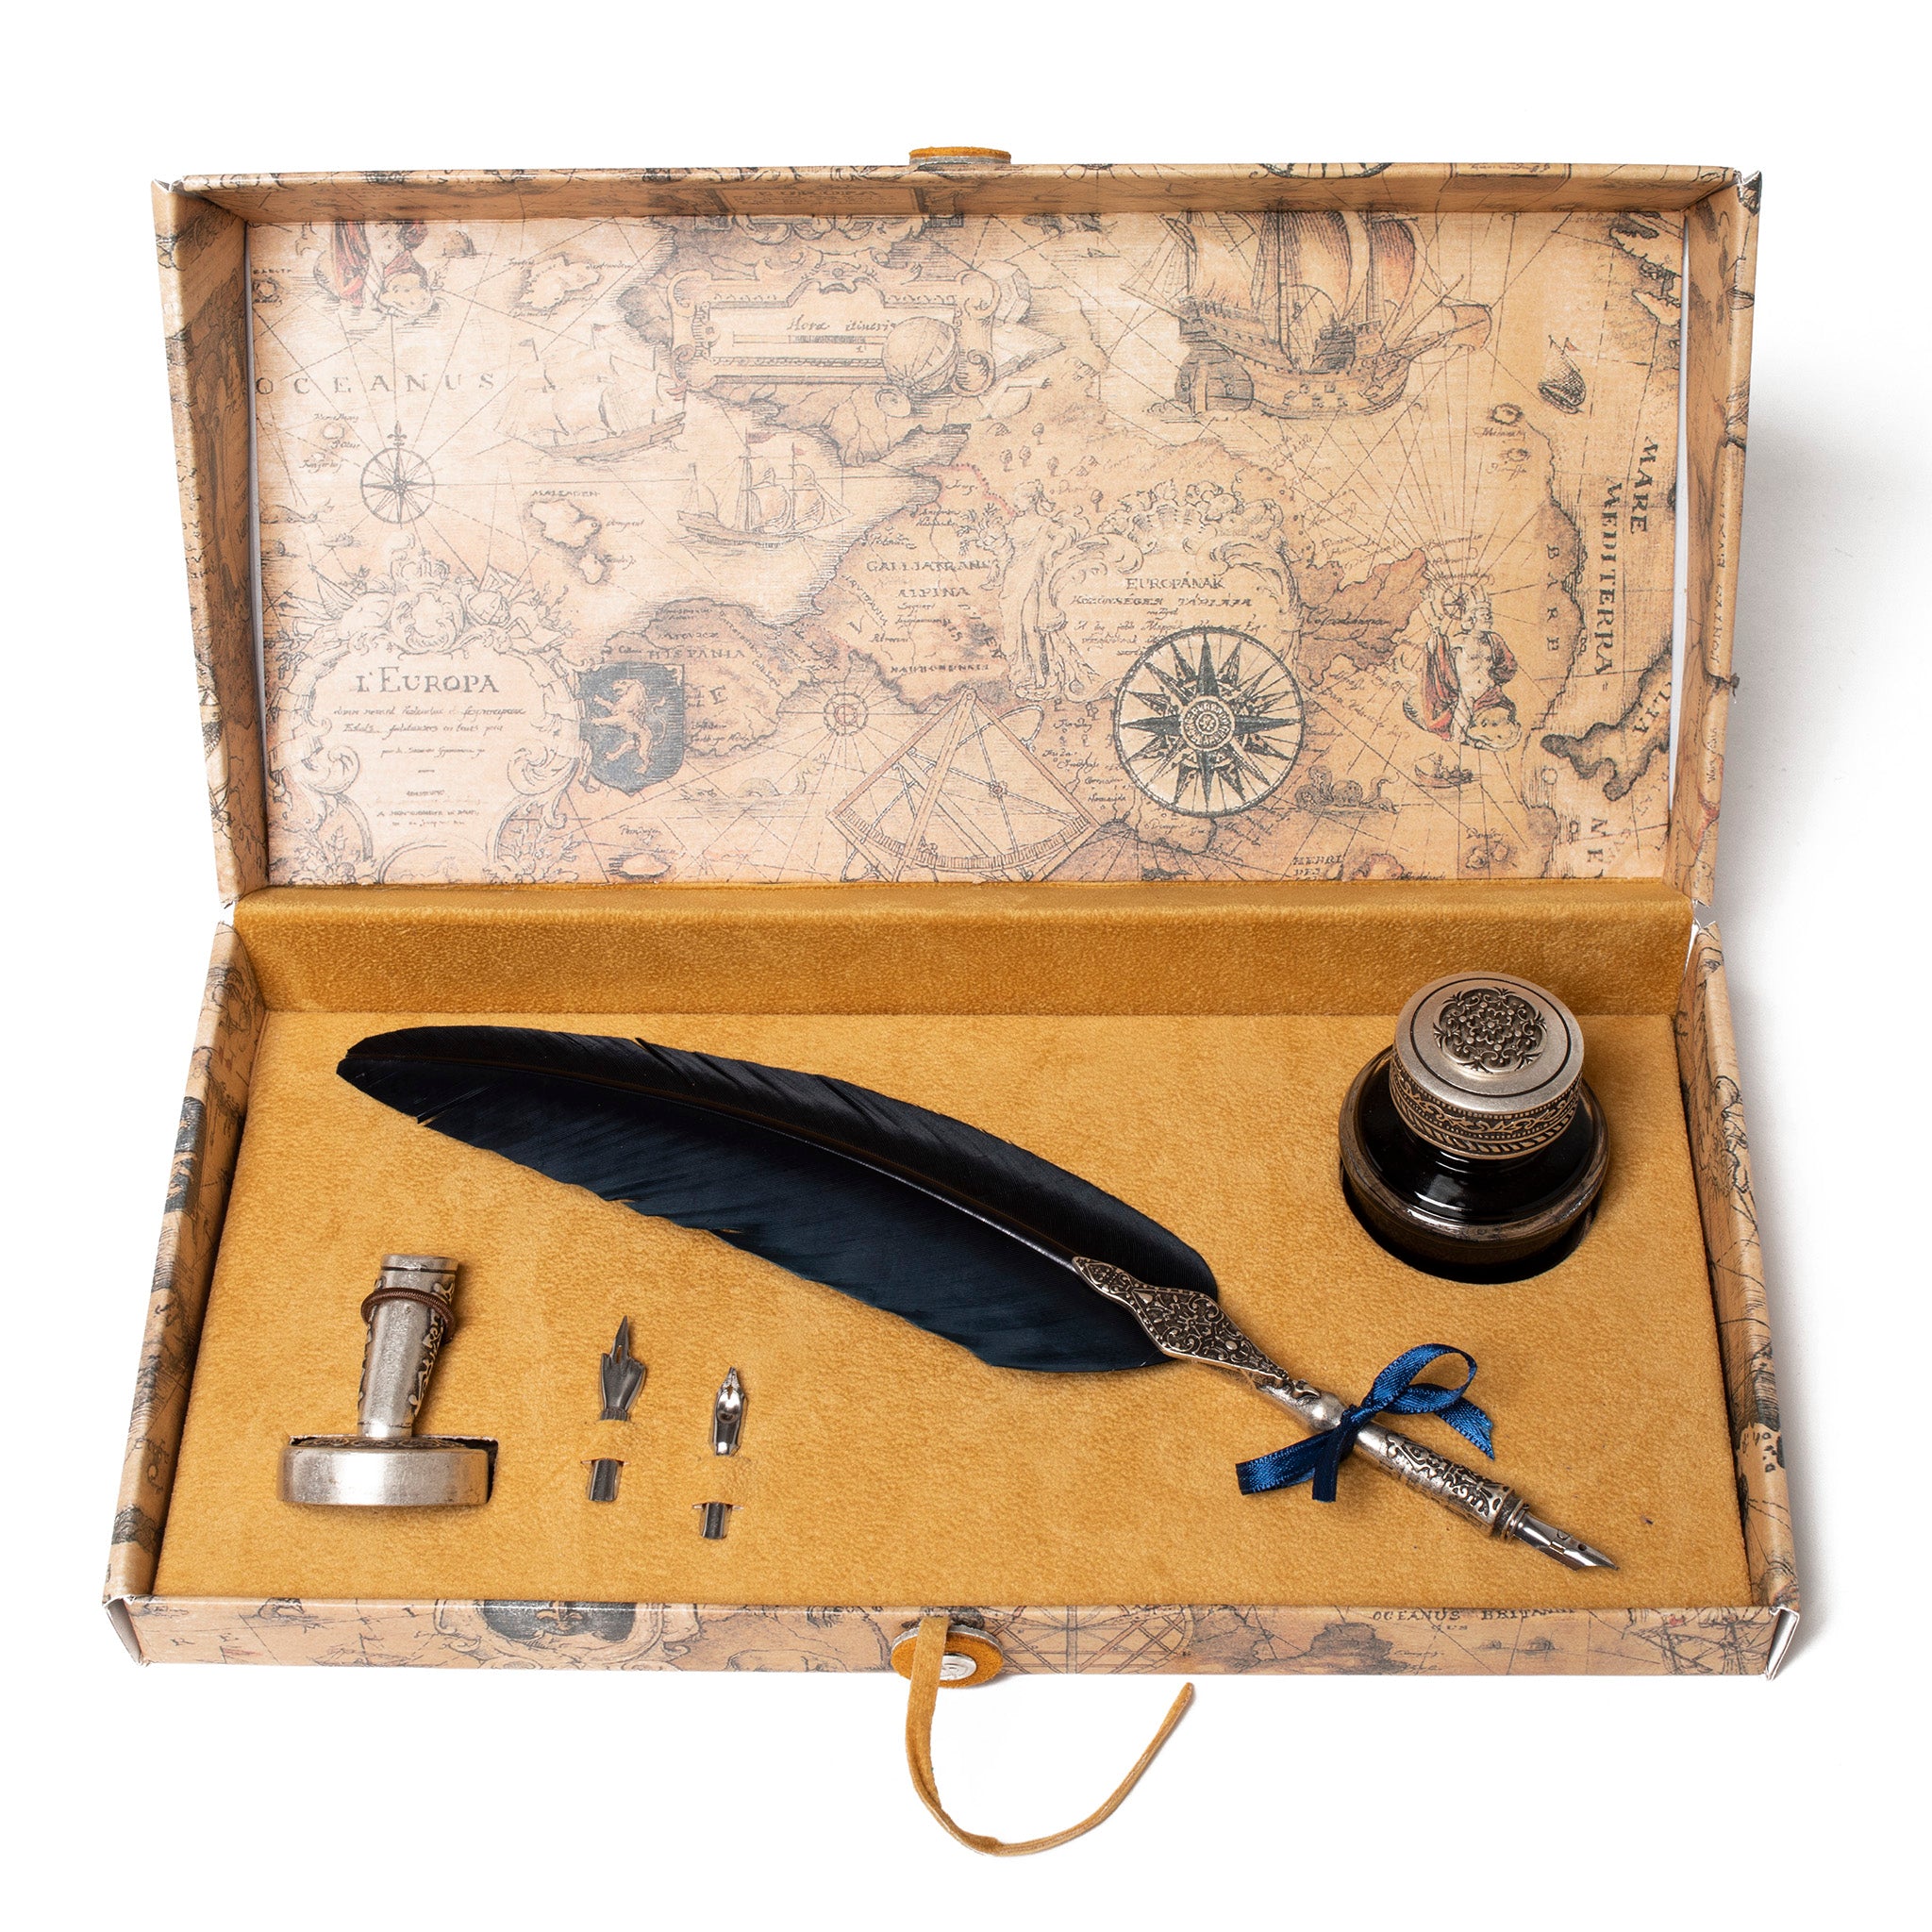 Calligraphy Set with Feather Pen and Ink Well - Getty Museum Store